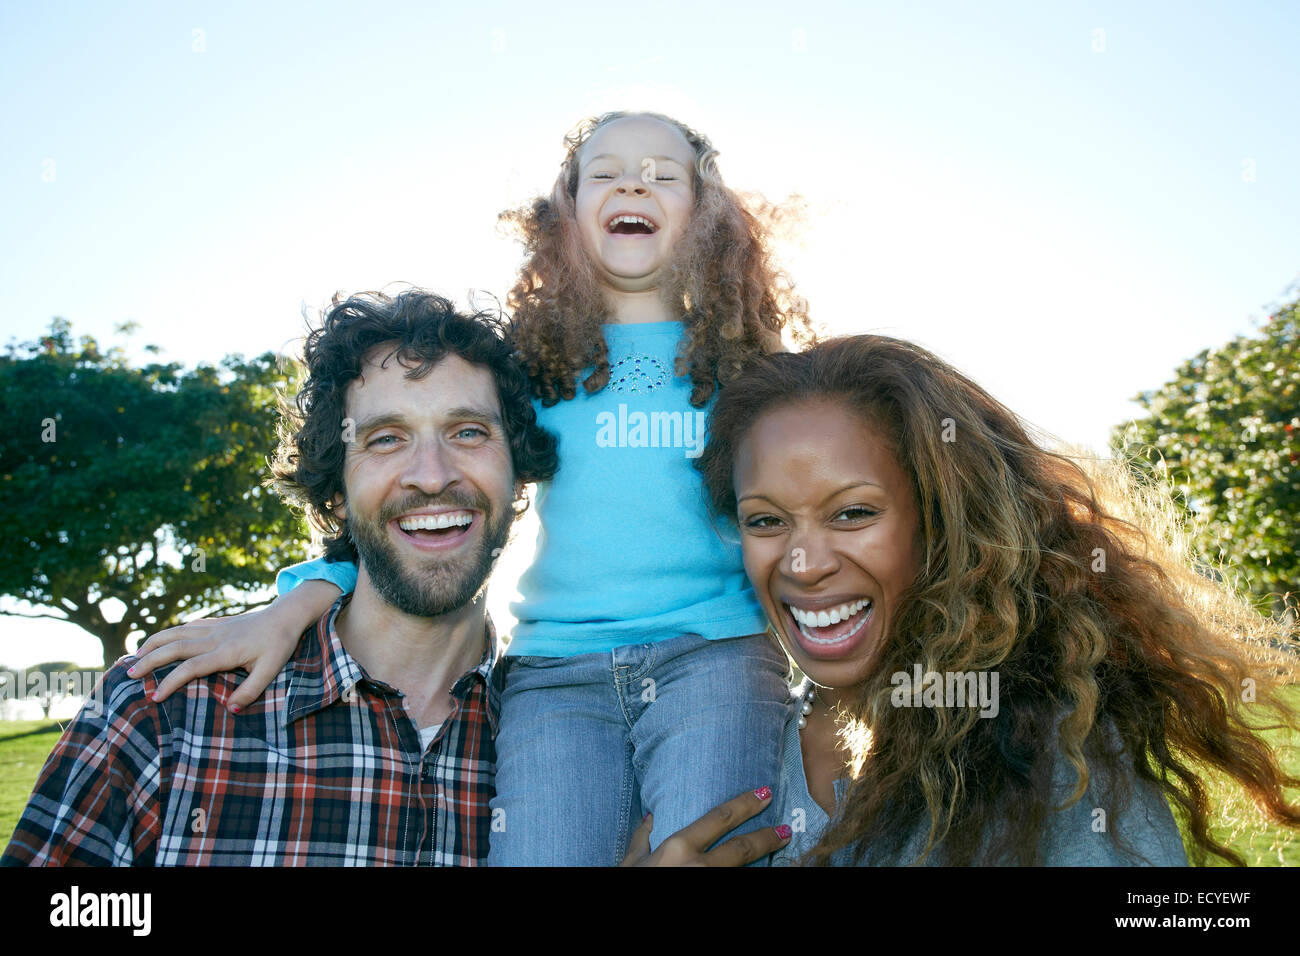 Family laughing together outdoors Stock Photo